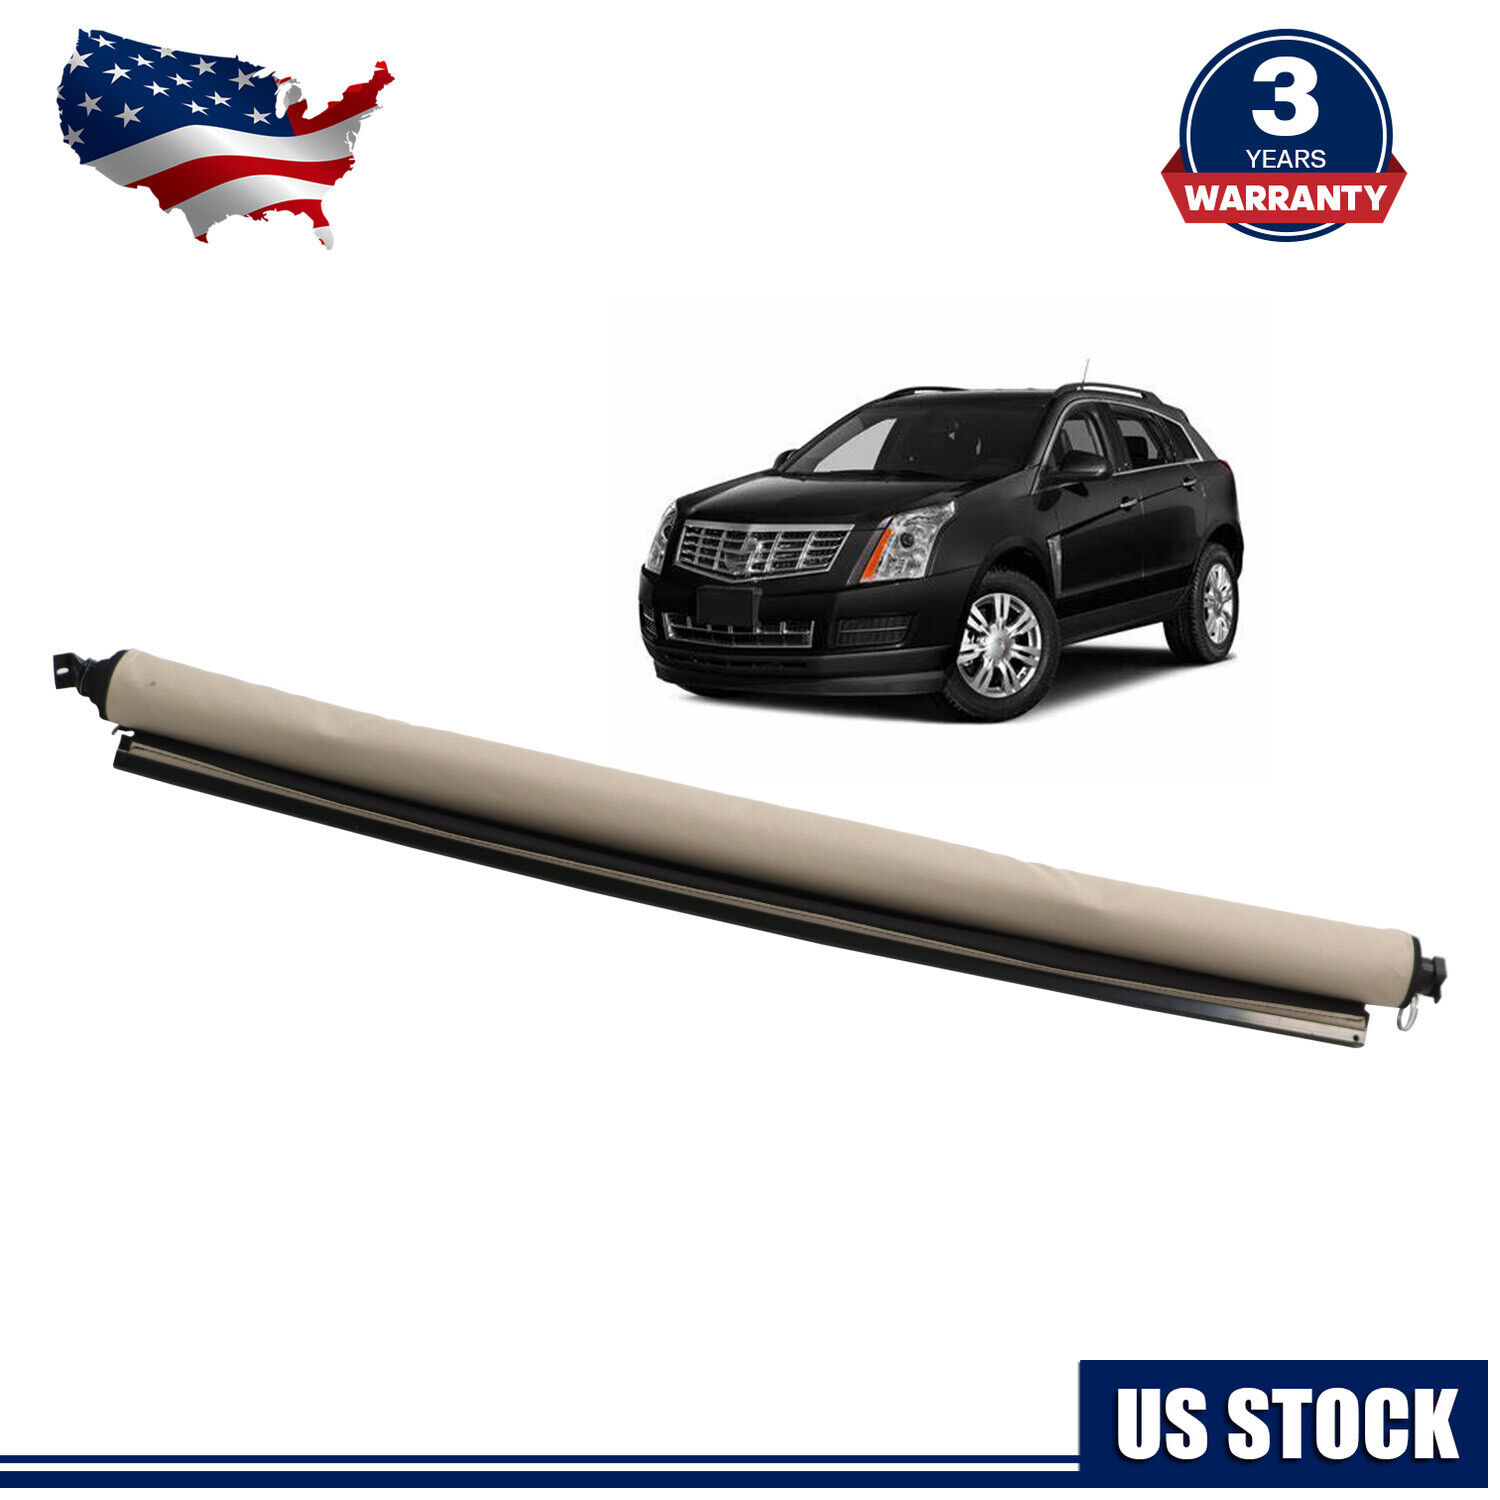 For Cadillac SRX Beige Sunroof Sun Roof Curtain Shade Cover 25964410 2010-2016